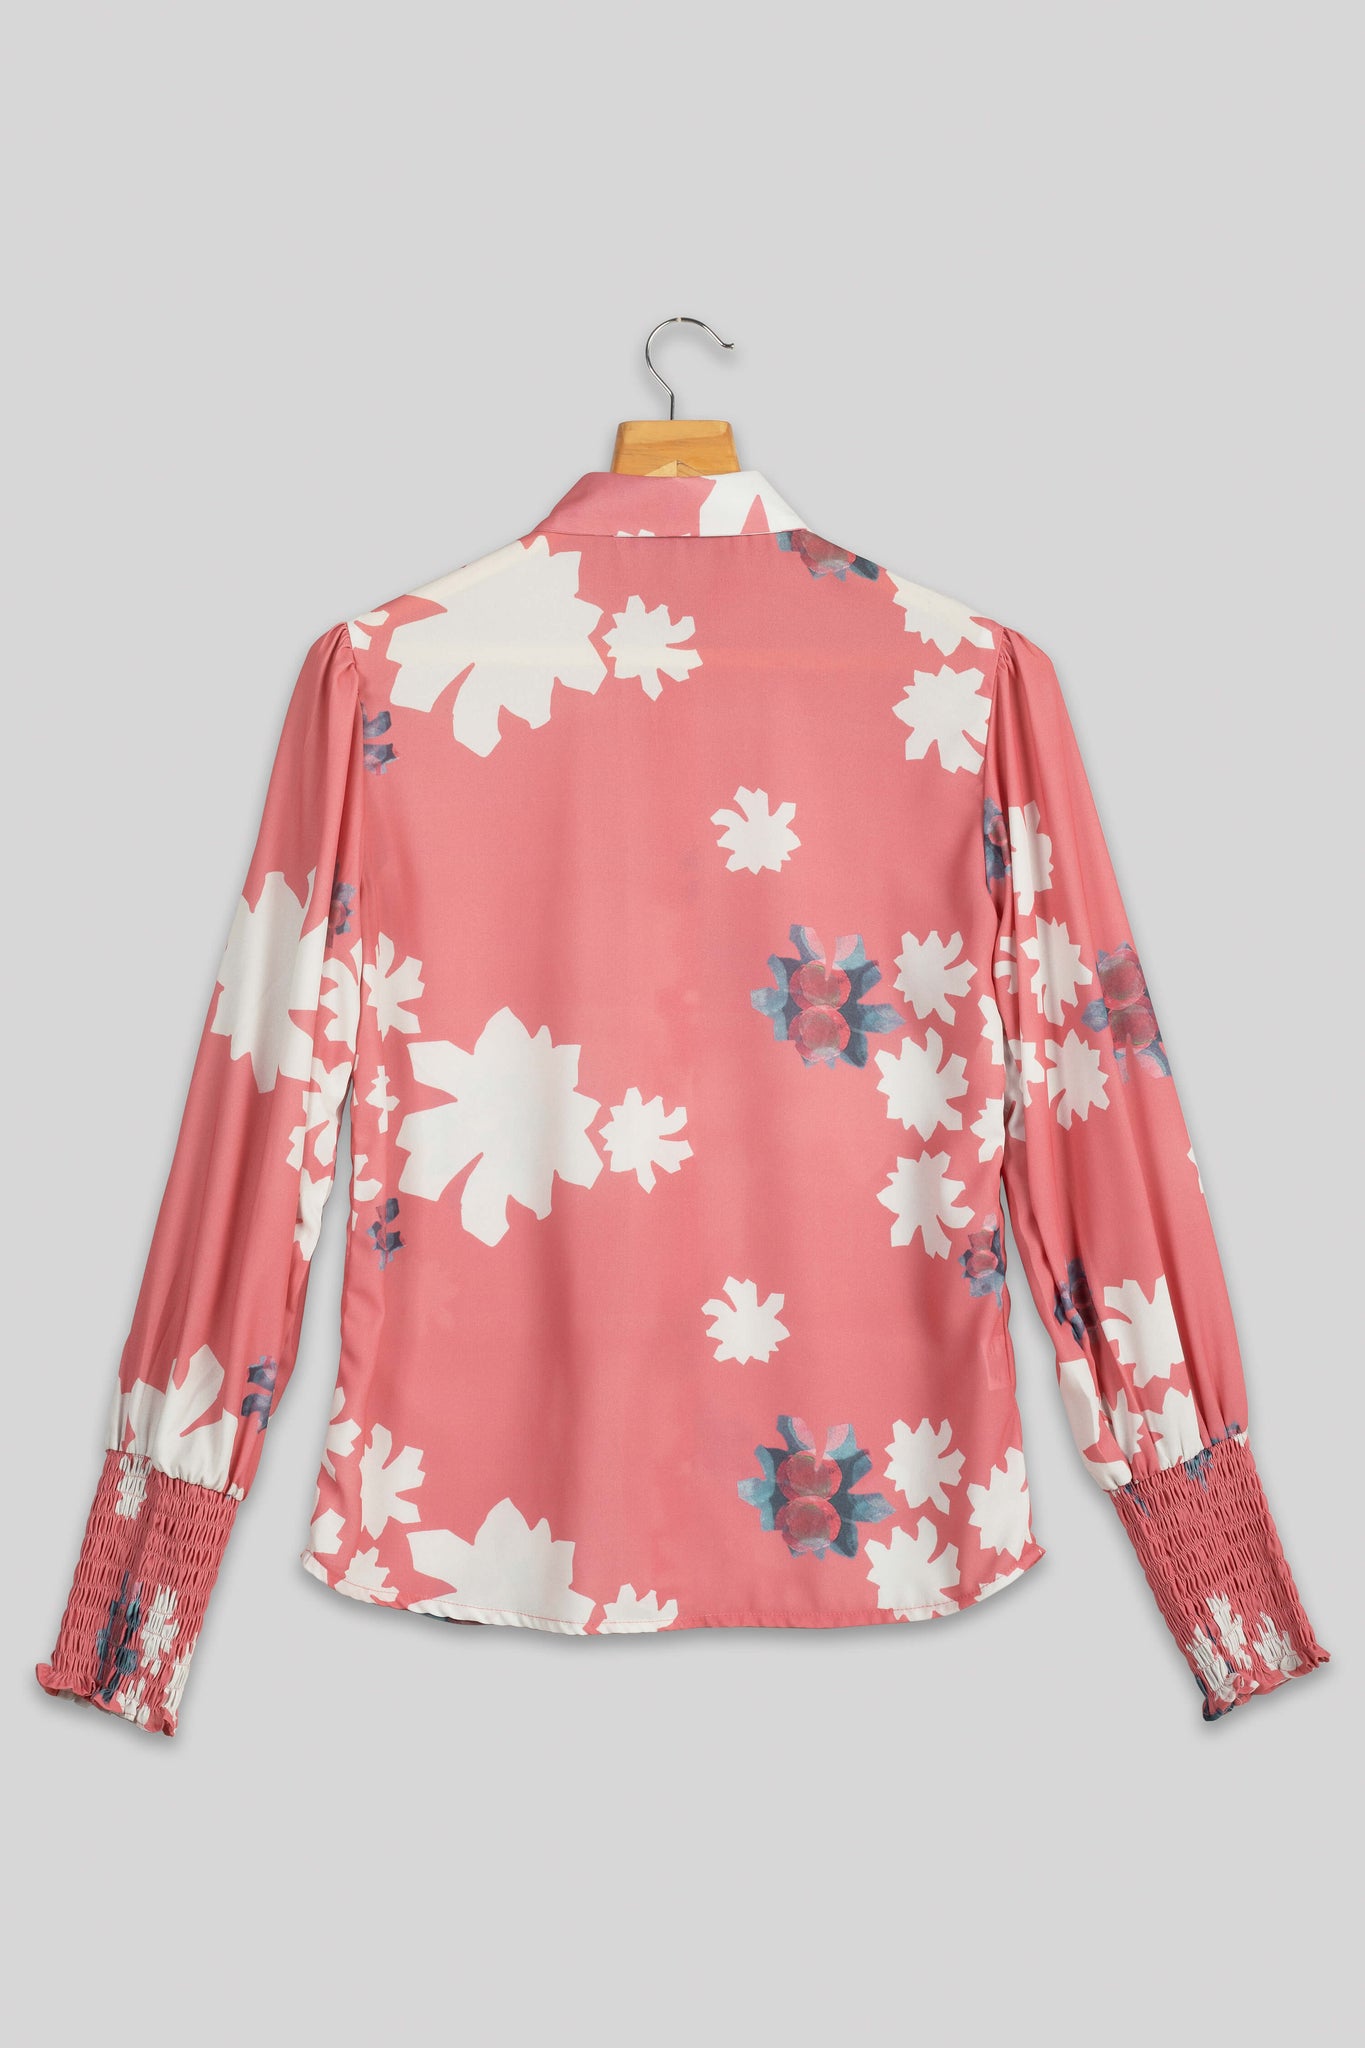 Fashionable Floral Trendy Sleeve Shirt For Women